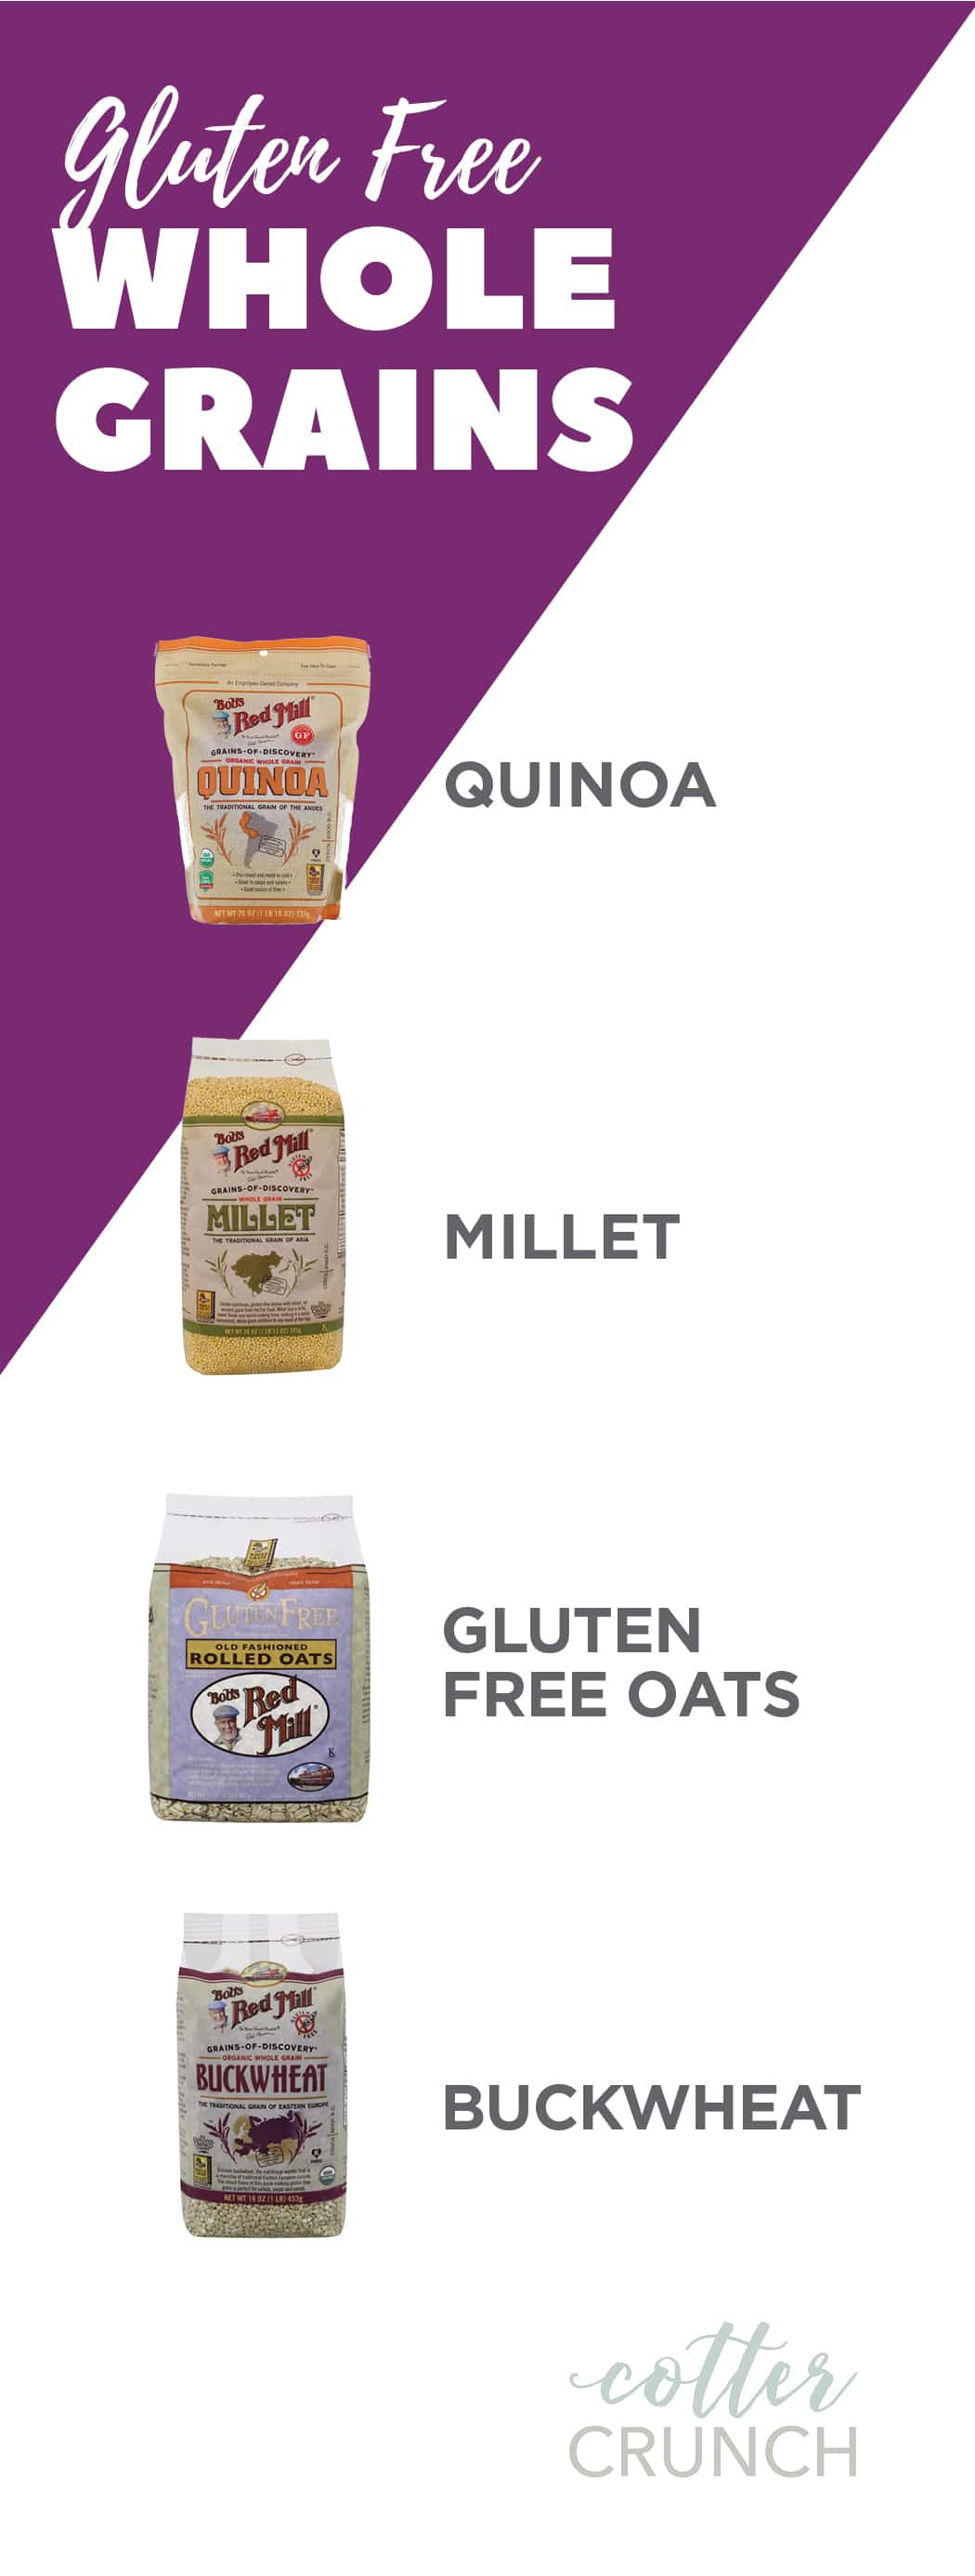 a graphic with bags of gluten free whole grains including quinoa, millet, gluten free oats, and buckwheat